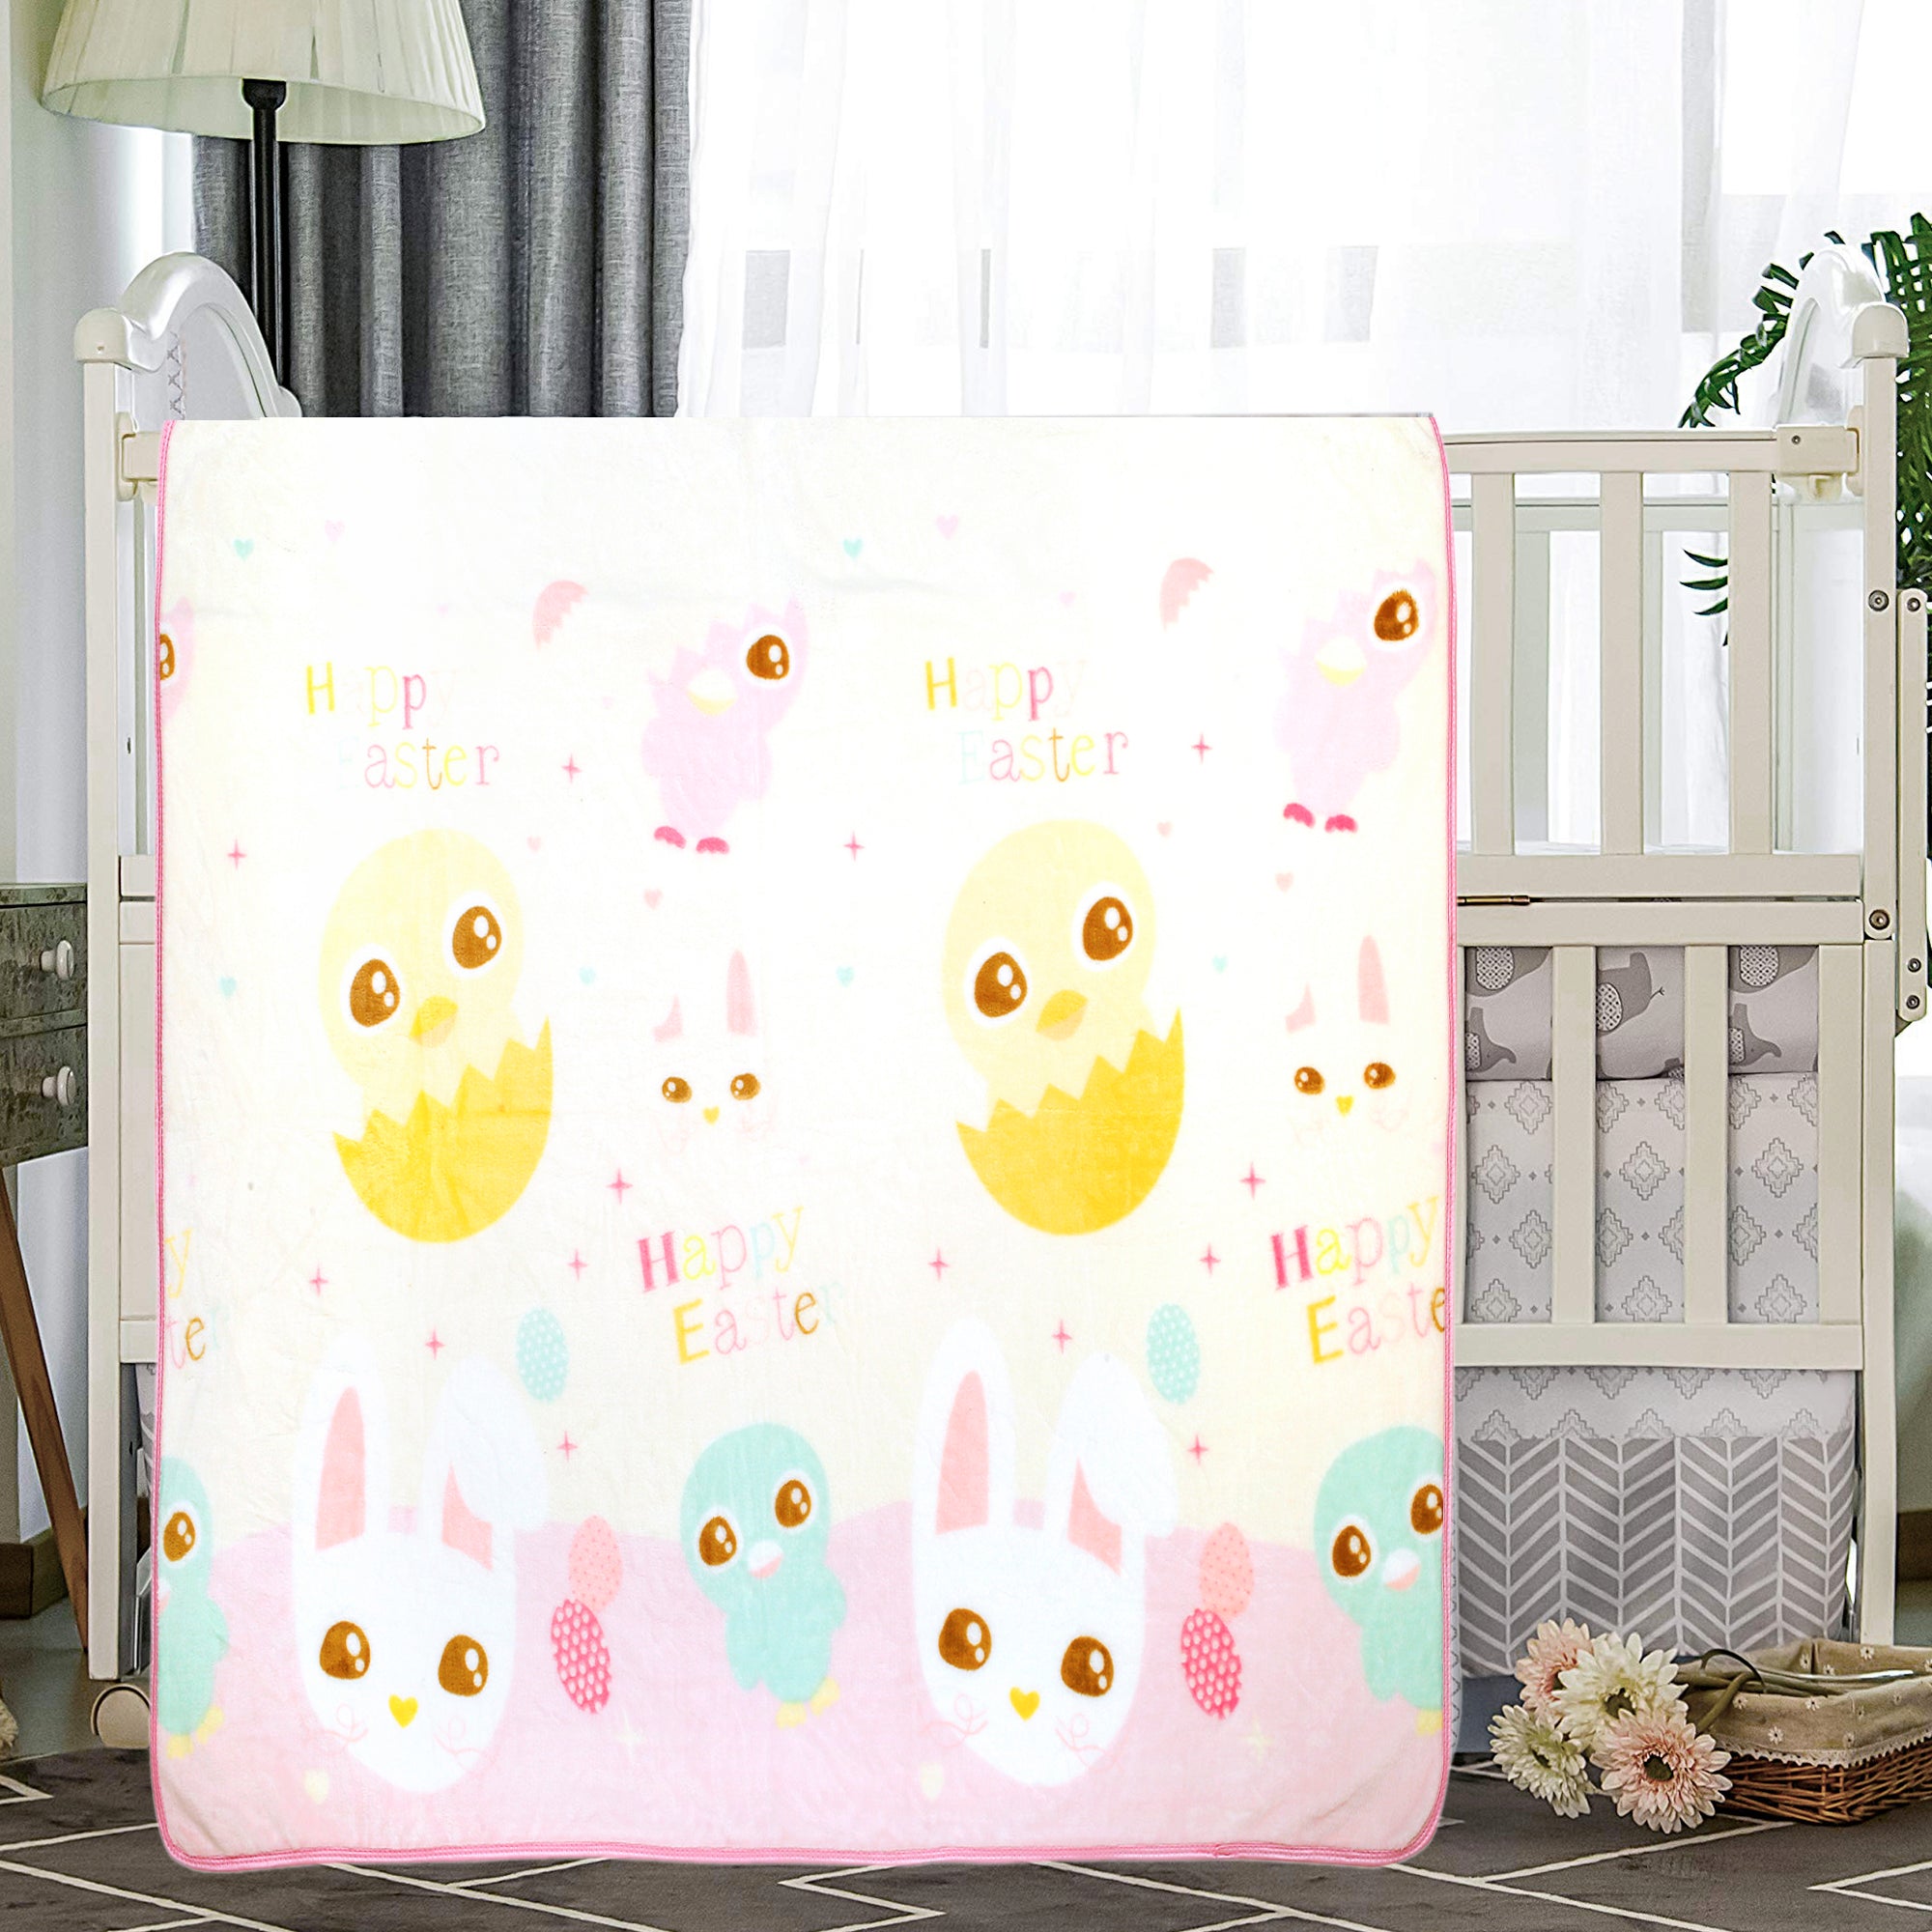 Big Eyed Friends White And Pink Blanket - Baby Moo